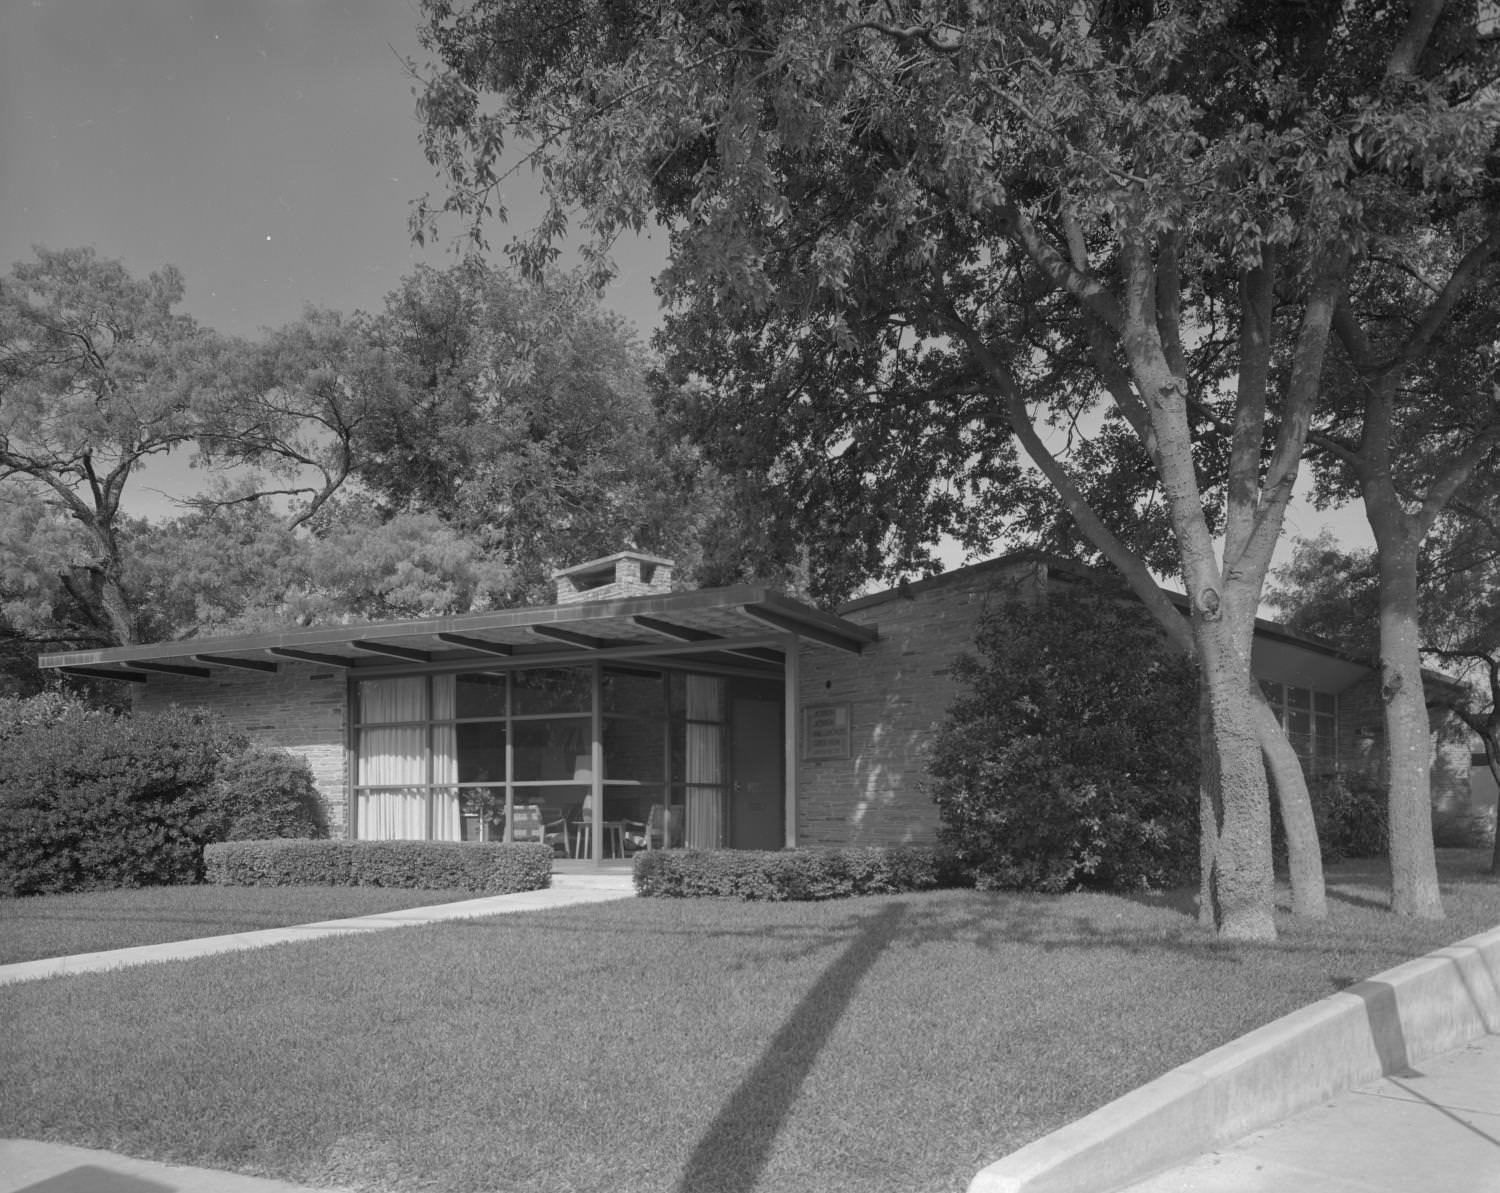 An office building located at 2816 Hemphill Park, designed and owned by Jessen, Jessen, Millhouse, and Greeven, 1960